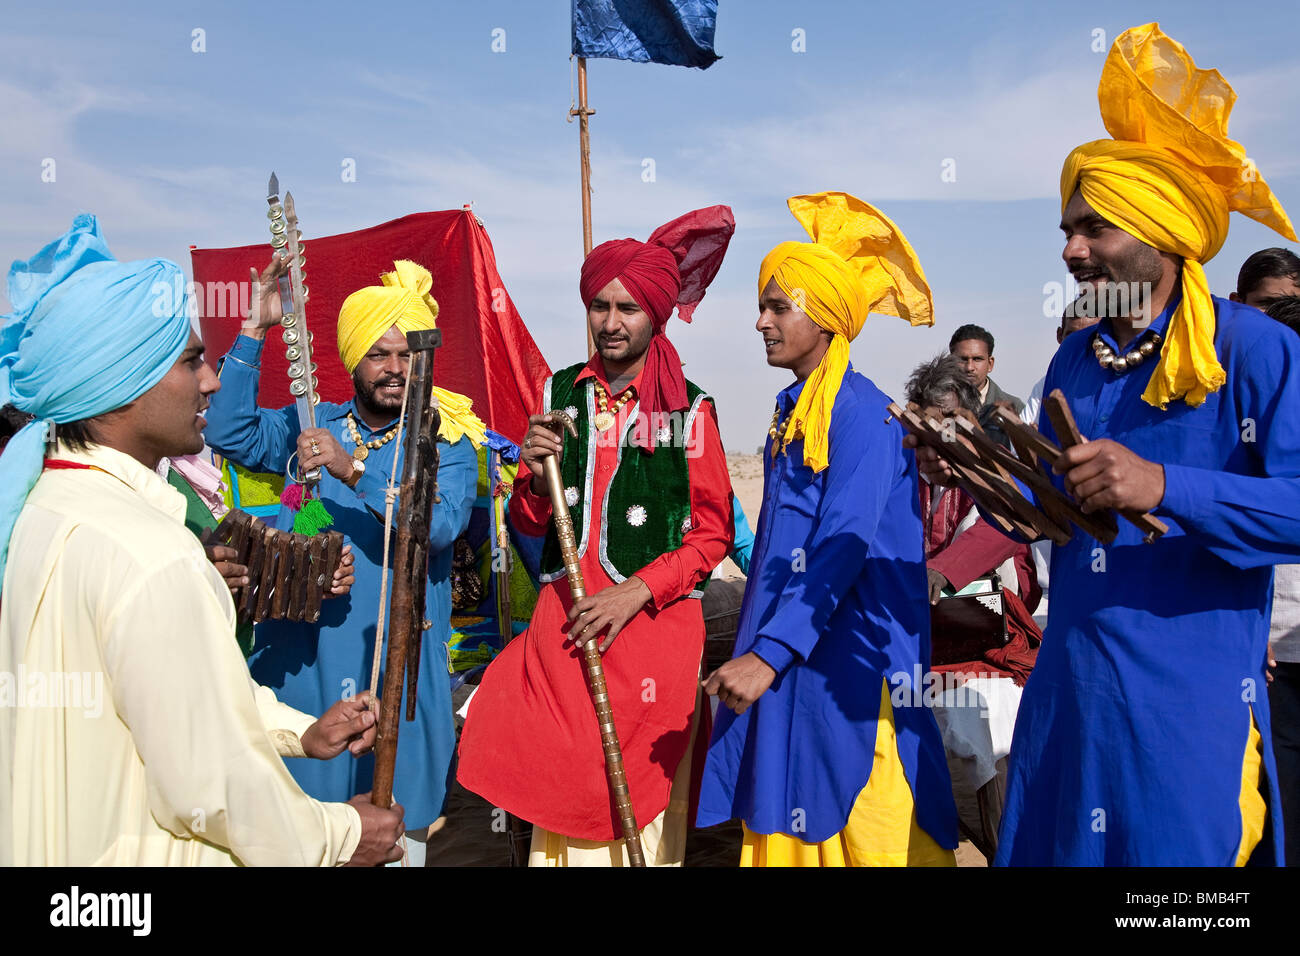 Indian musicians playing traditional instruments. Bikaner Desert Festival. Rajasthan. India Stock Photo